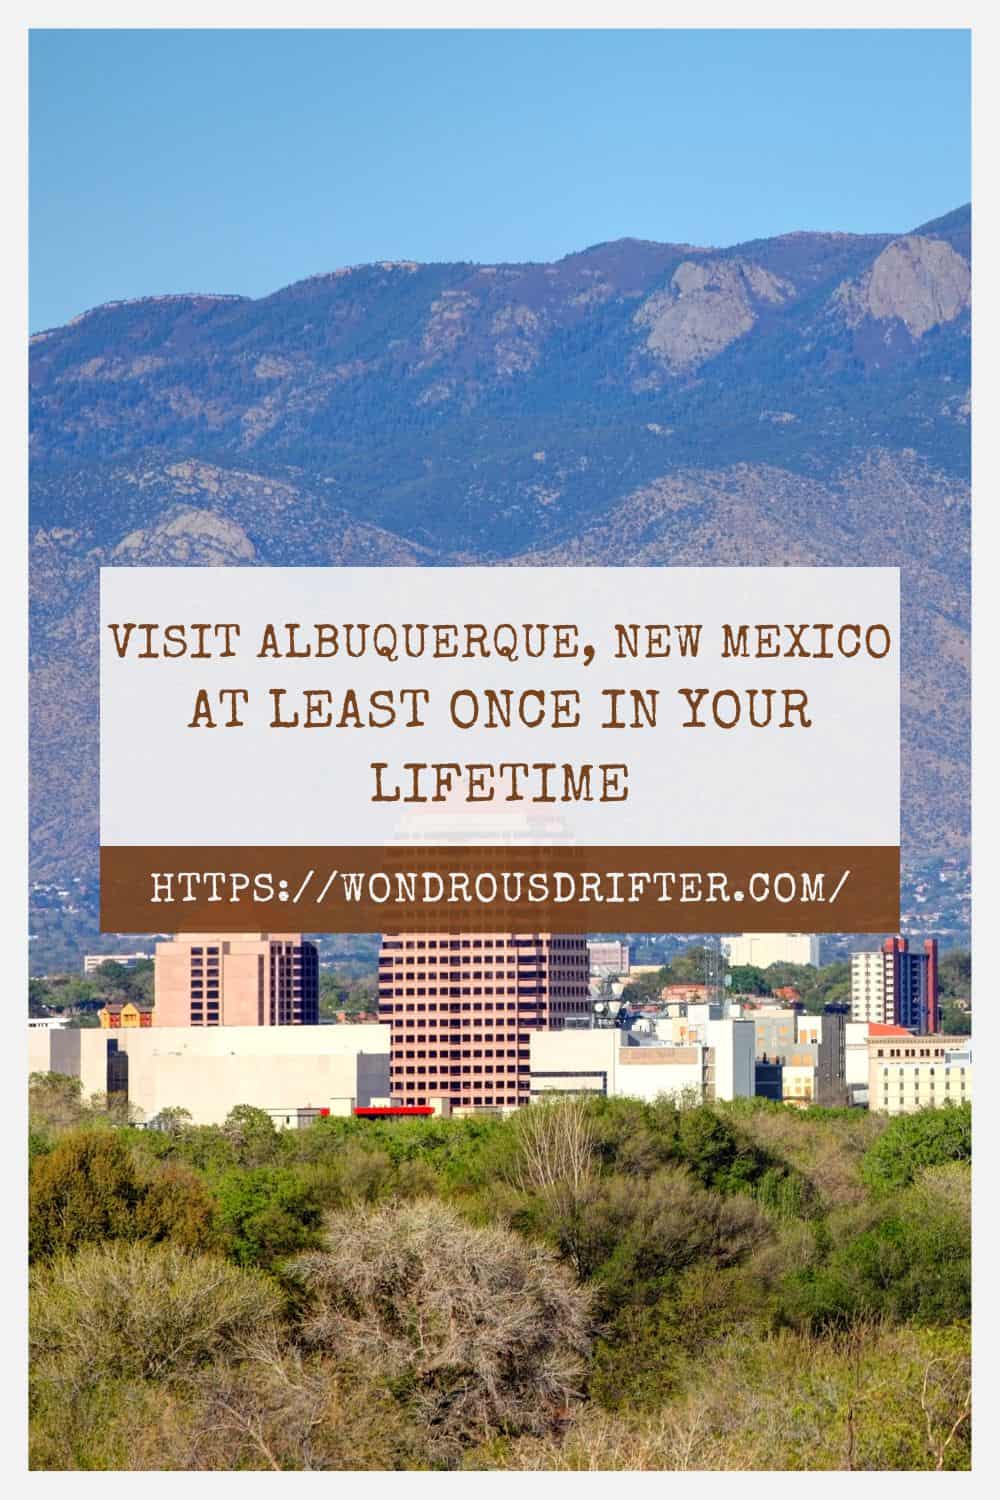 Visit Albuquerque New Mexico at least once in your lifetime